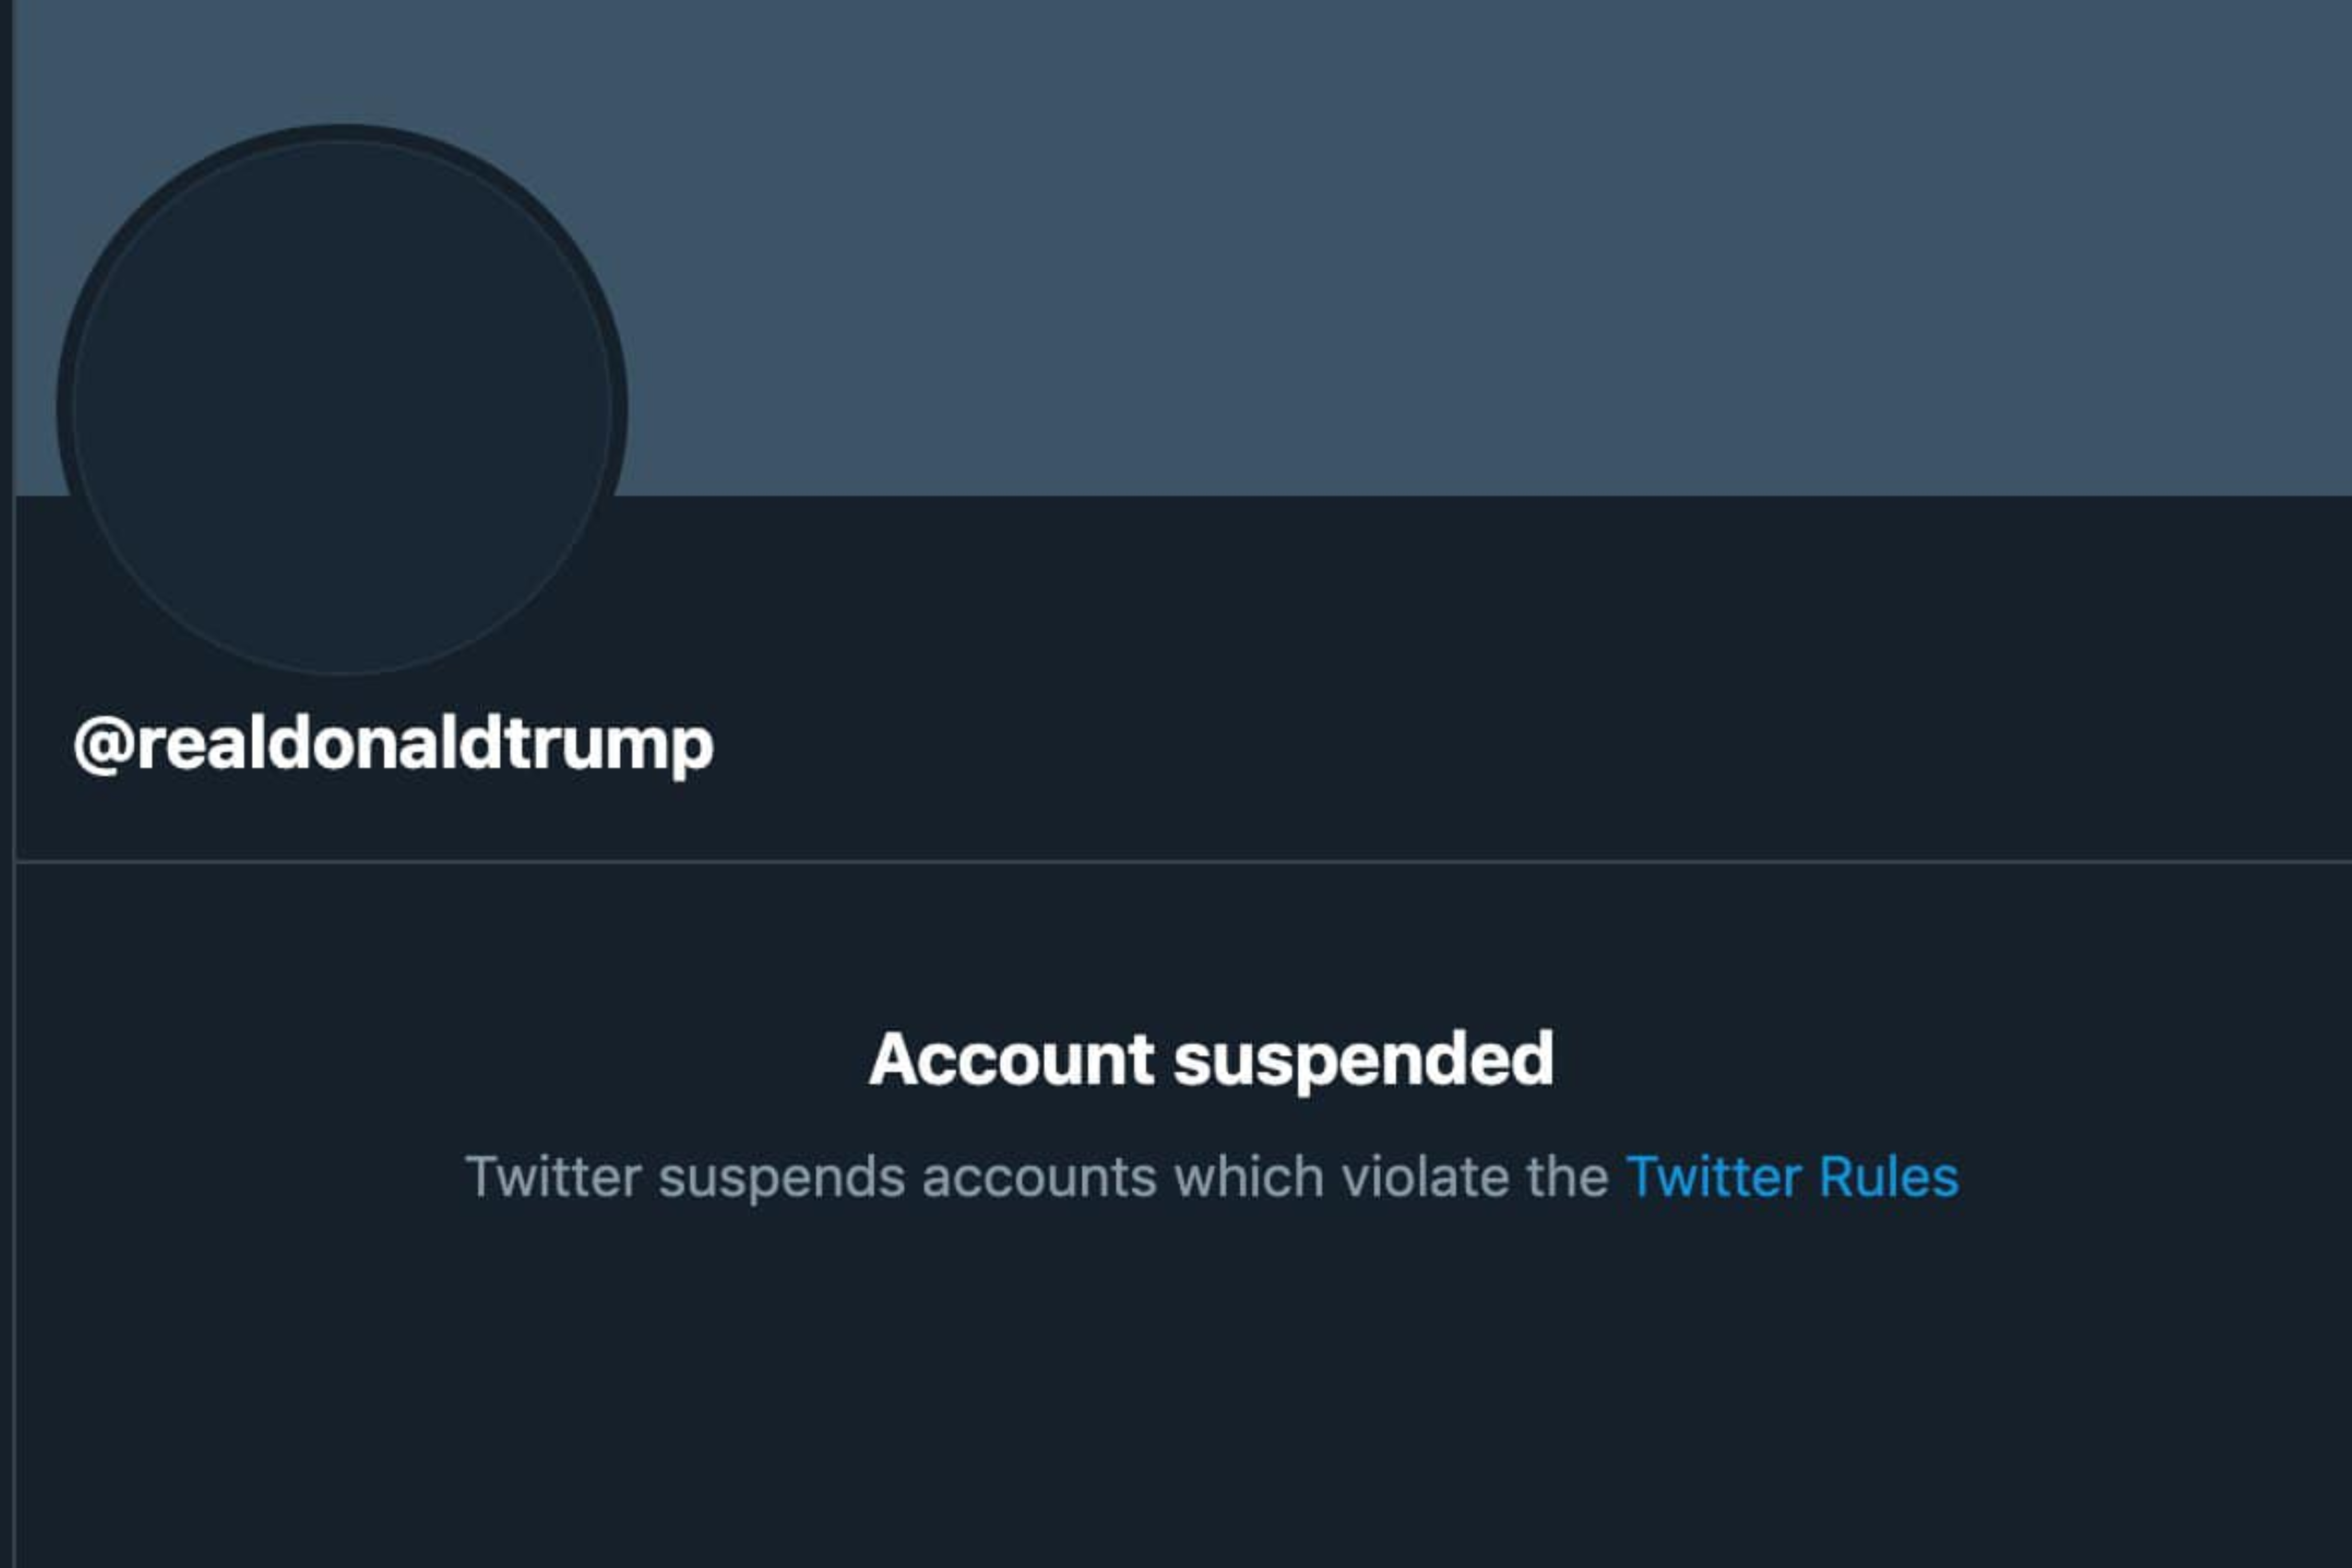 Permanently banned. Бан твиттера. Бан в Твиттере как выглядит. Your account was suspended twitter. User suspend.